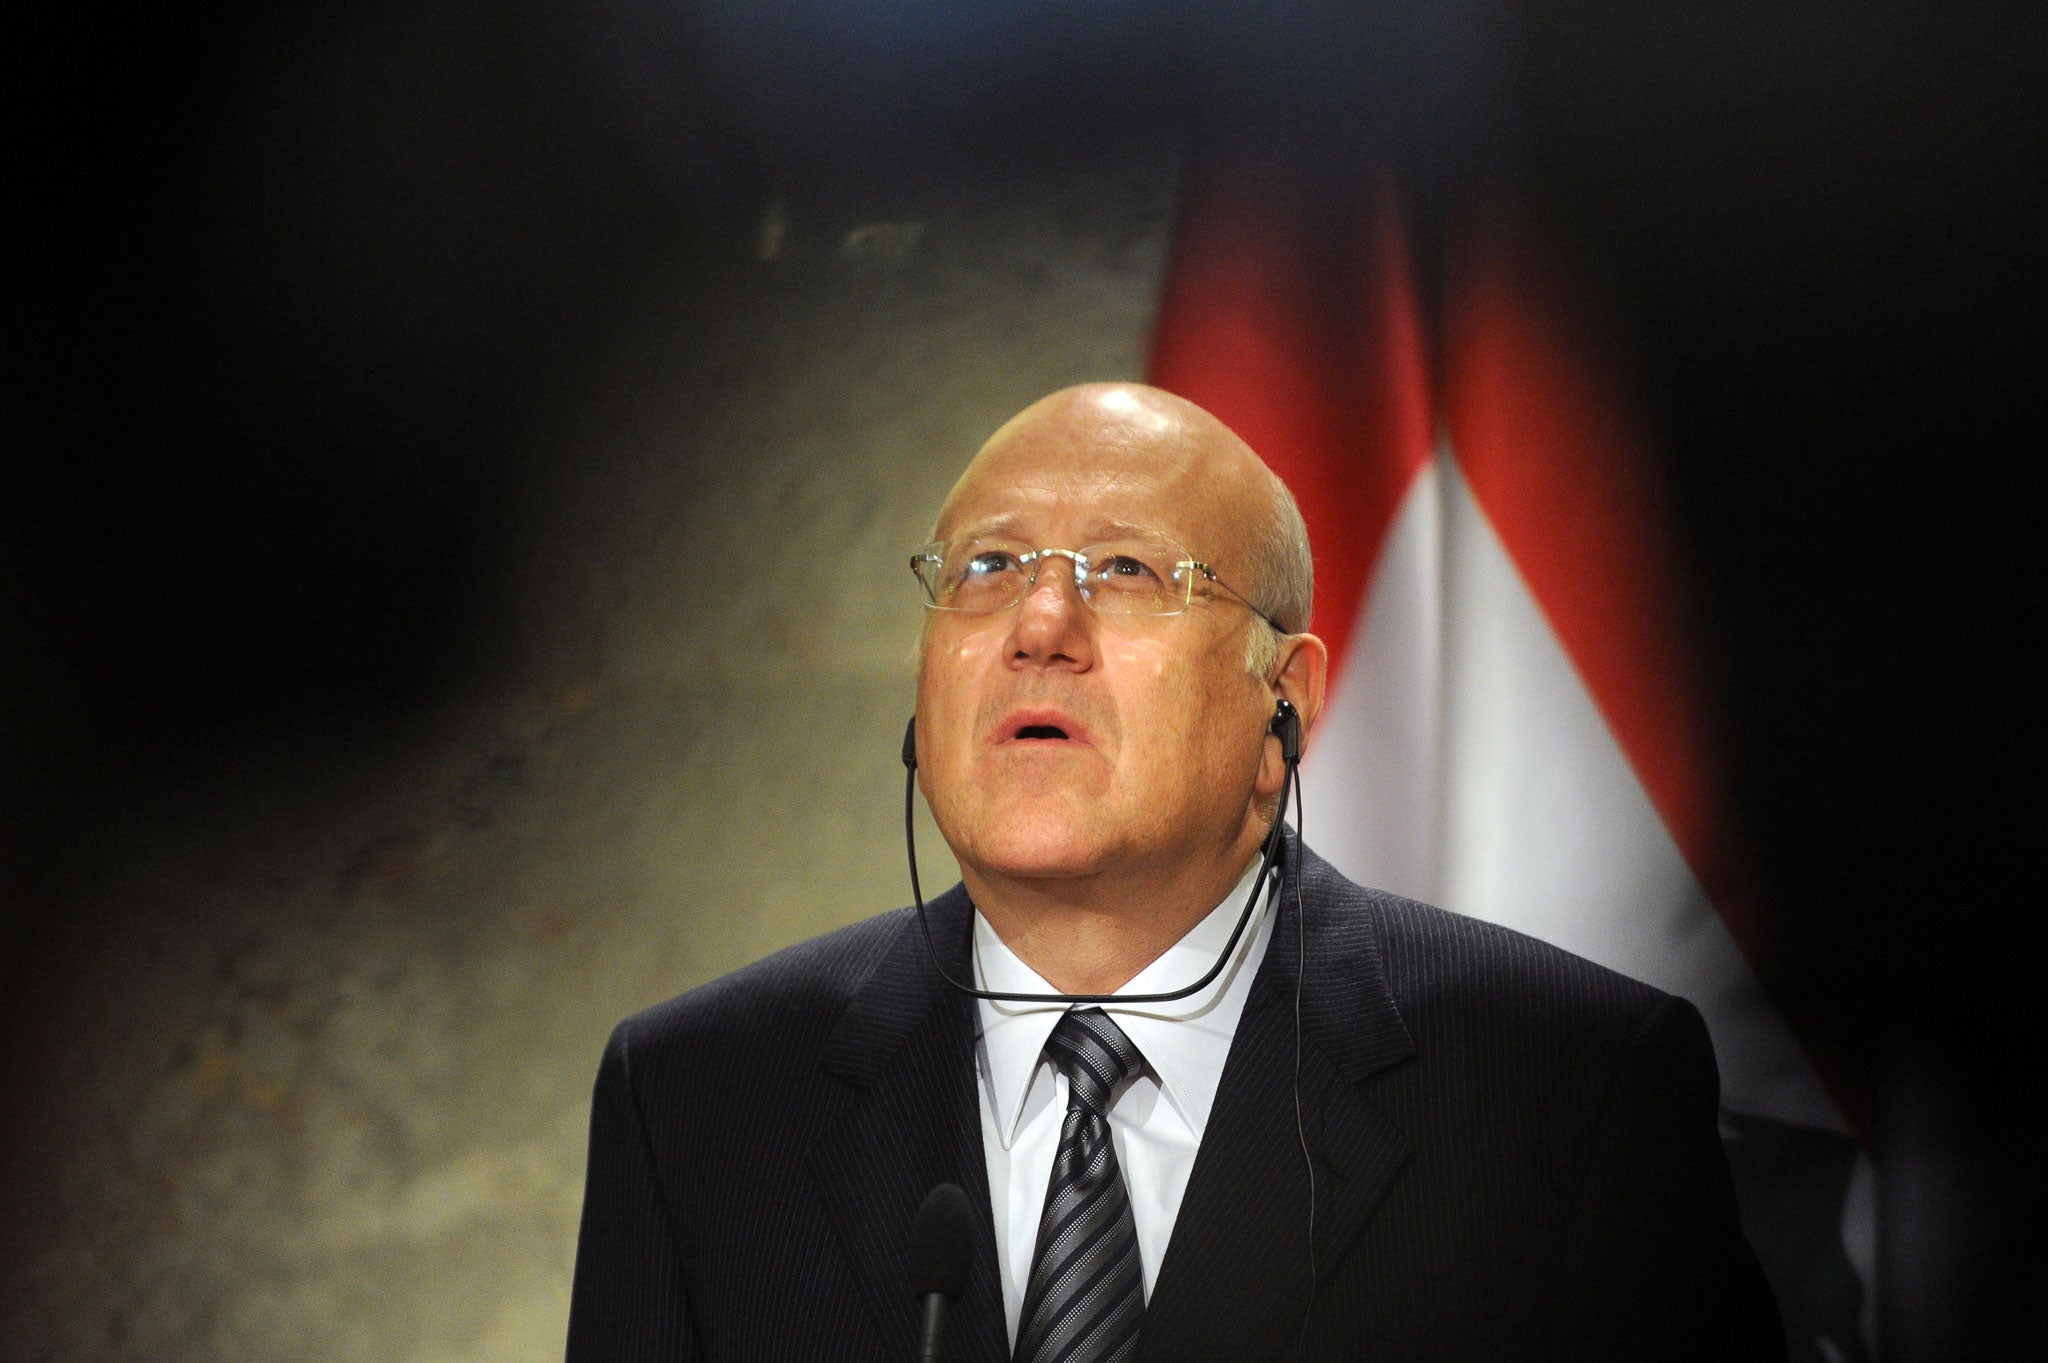 Najib Mikati has resigned from his position as Lebanon's Prime Minister